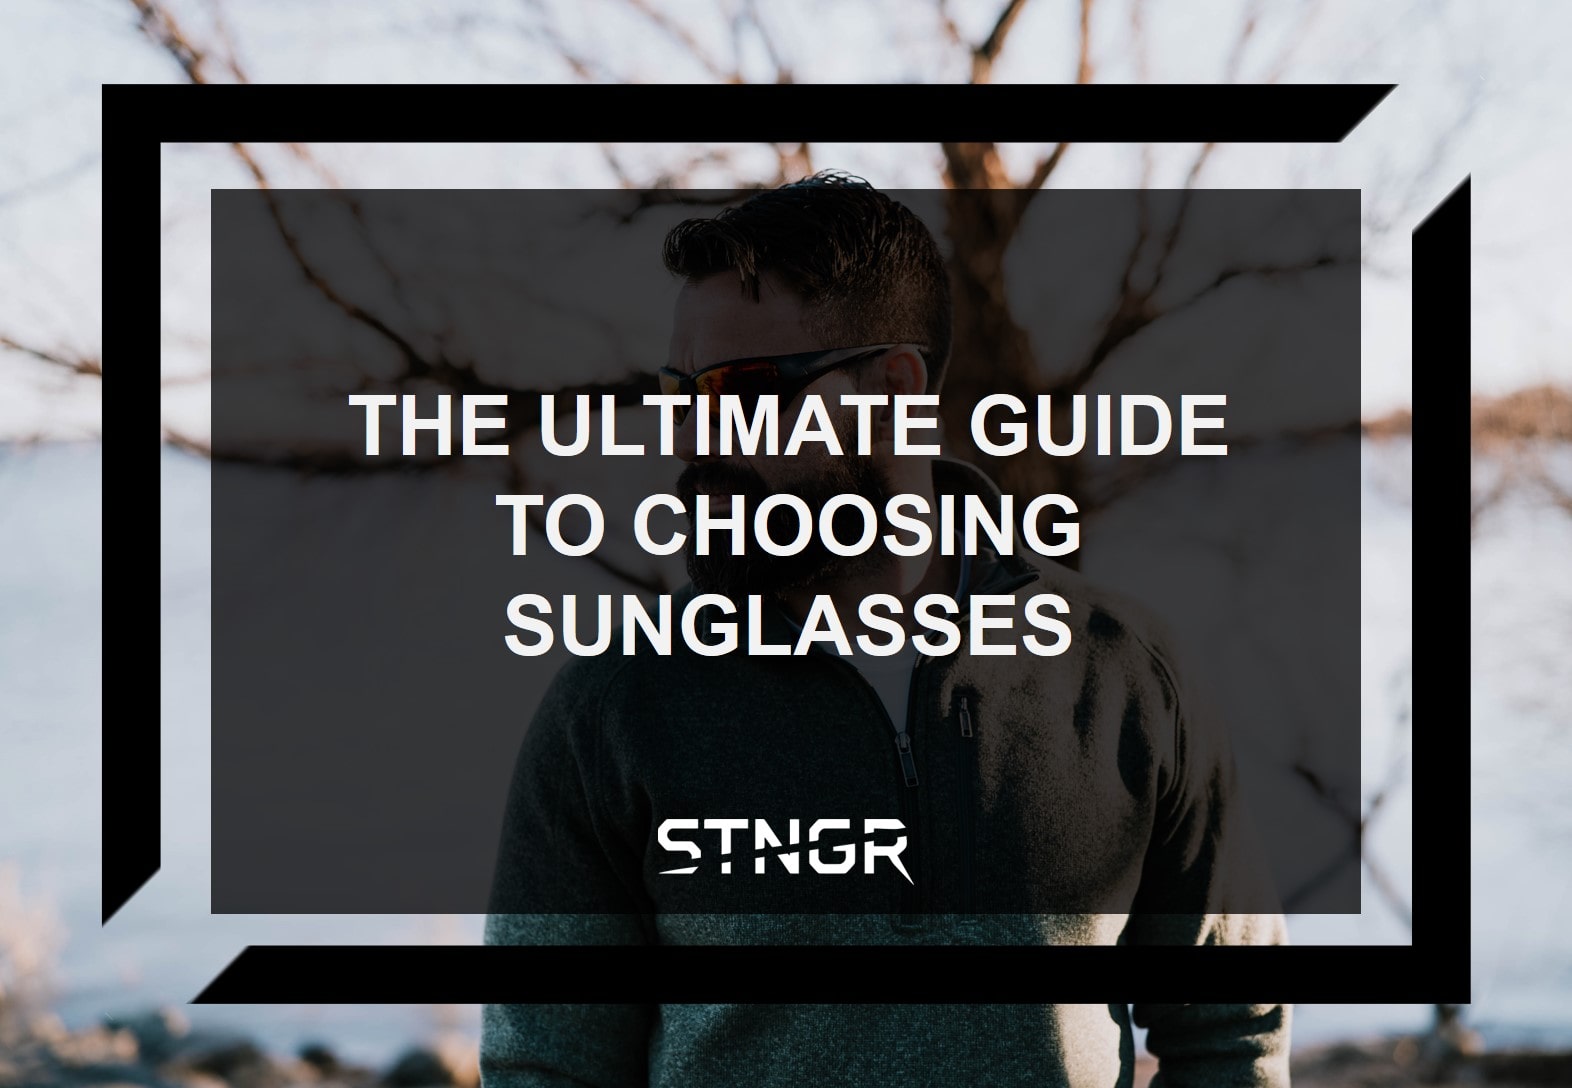 Sunglasses Captions for Instagram That Are Perfect for Selfies